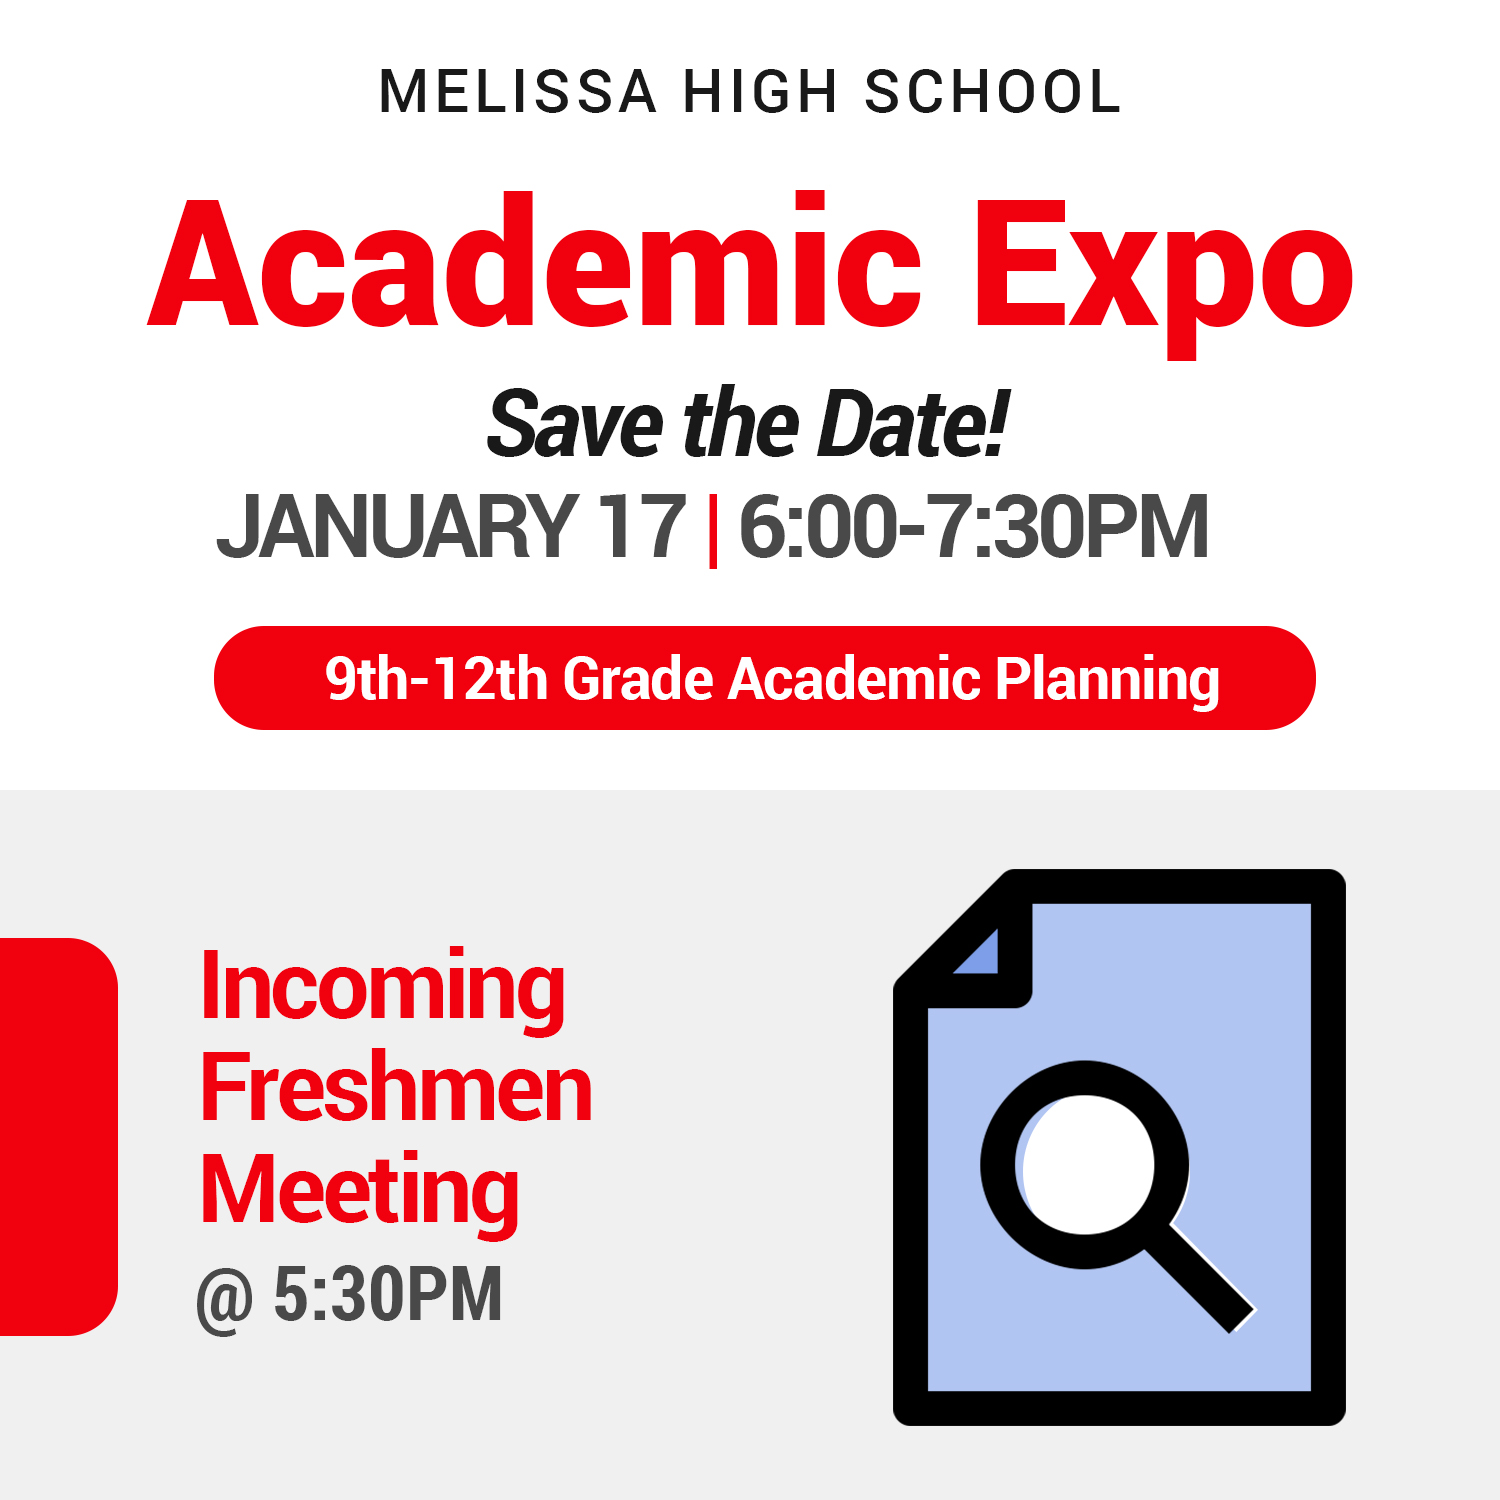 a graphic image advertising the academic expo at the high school